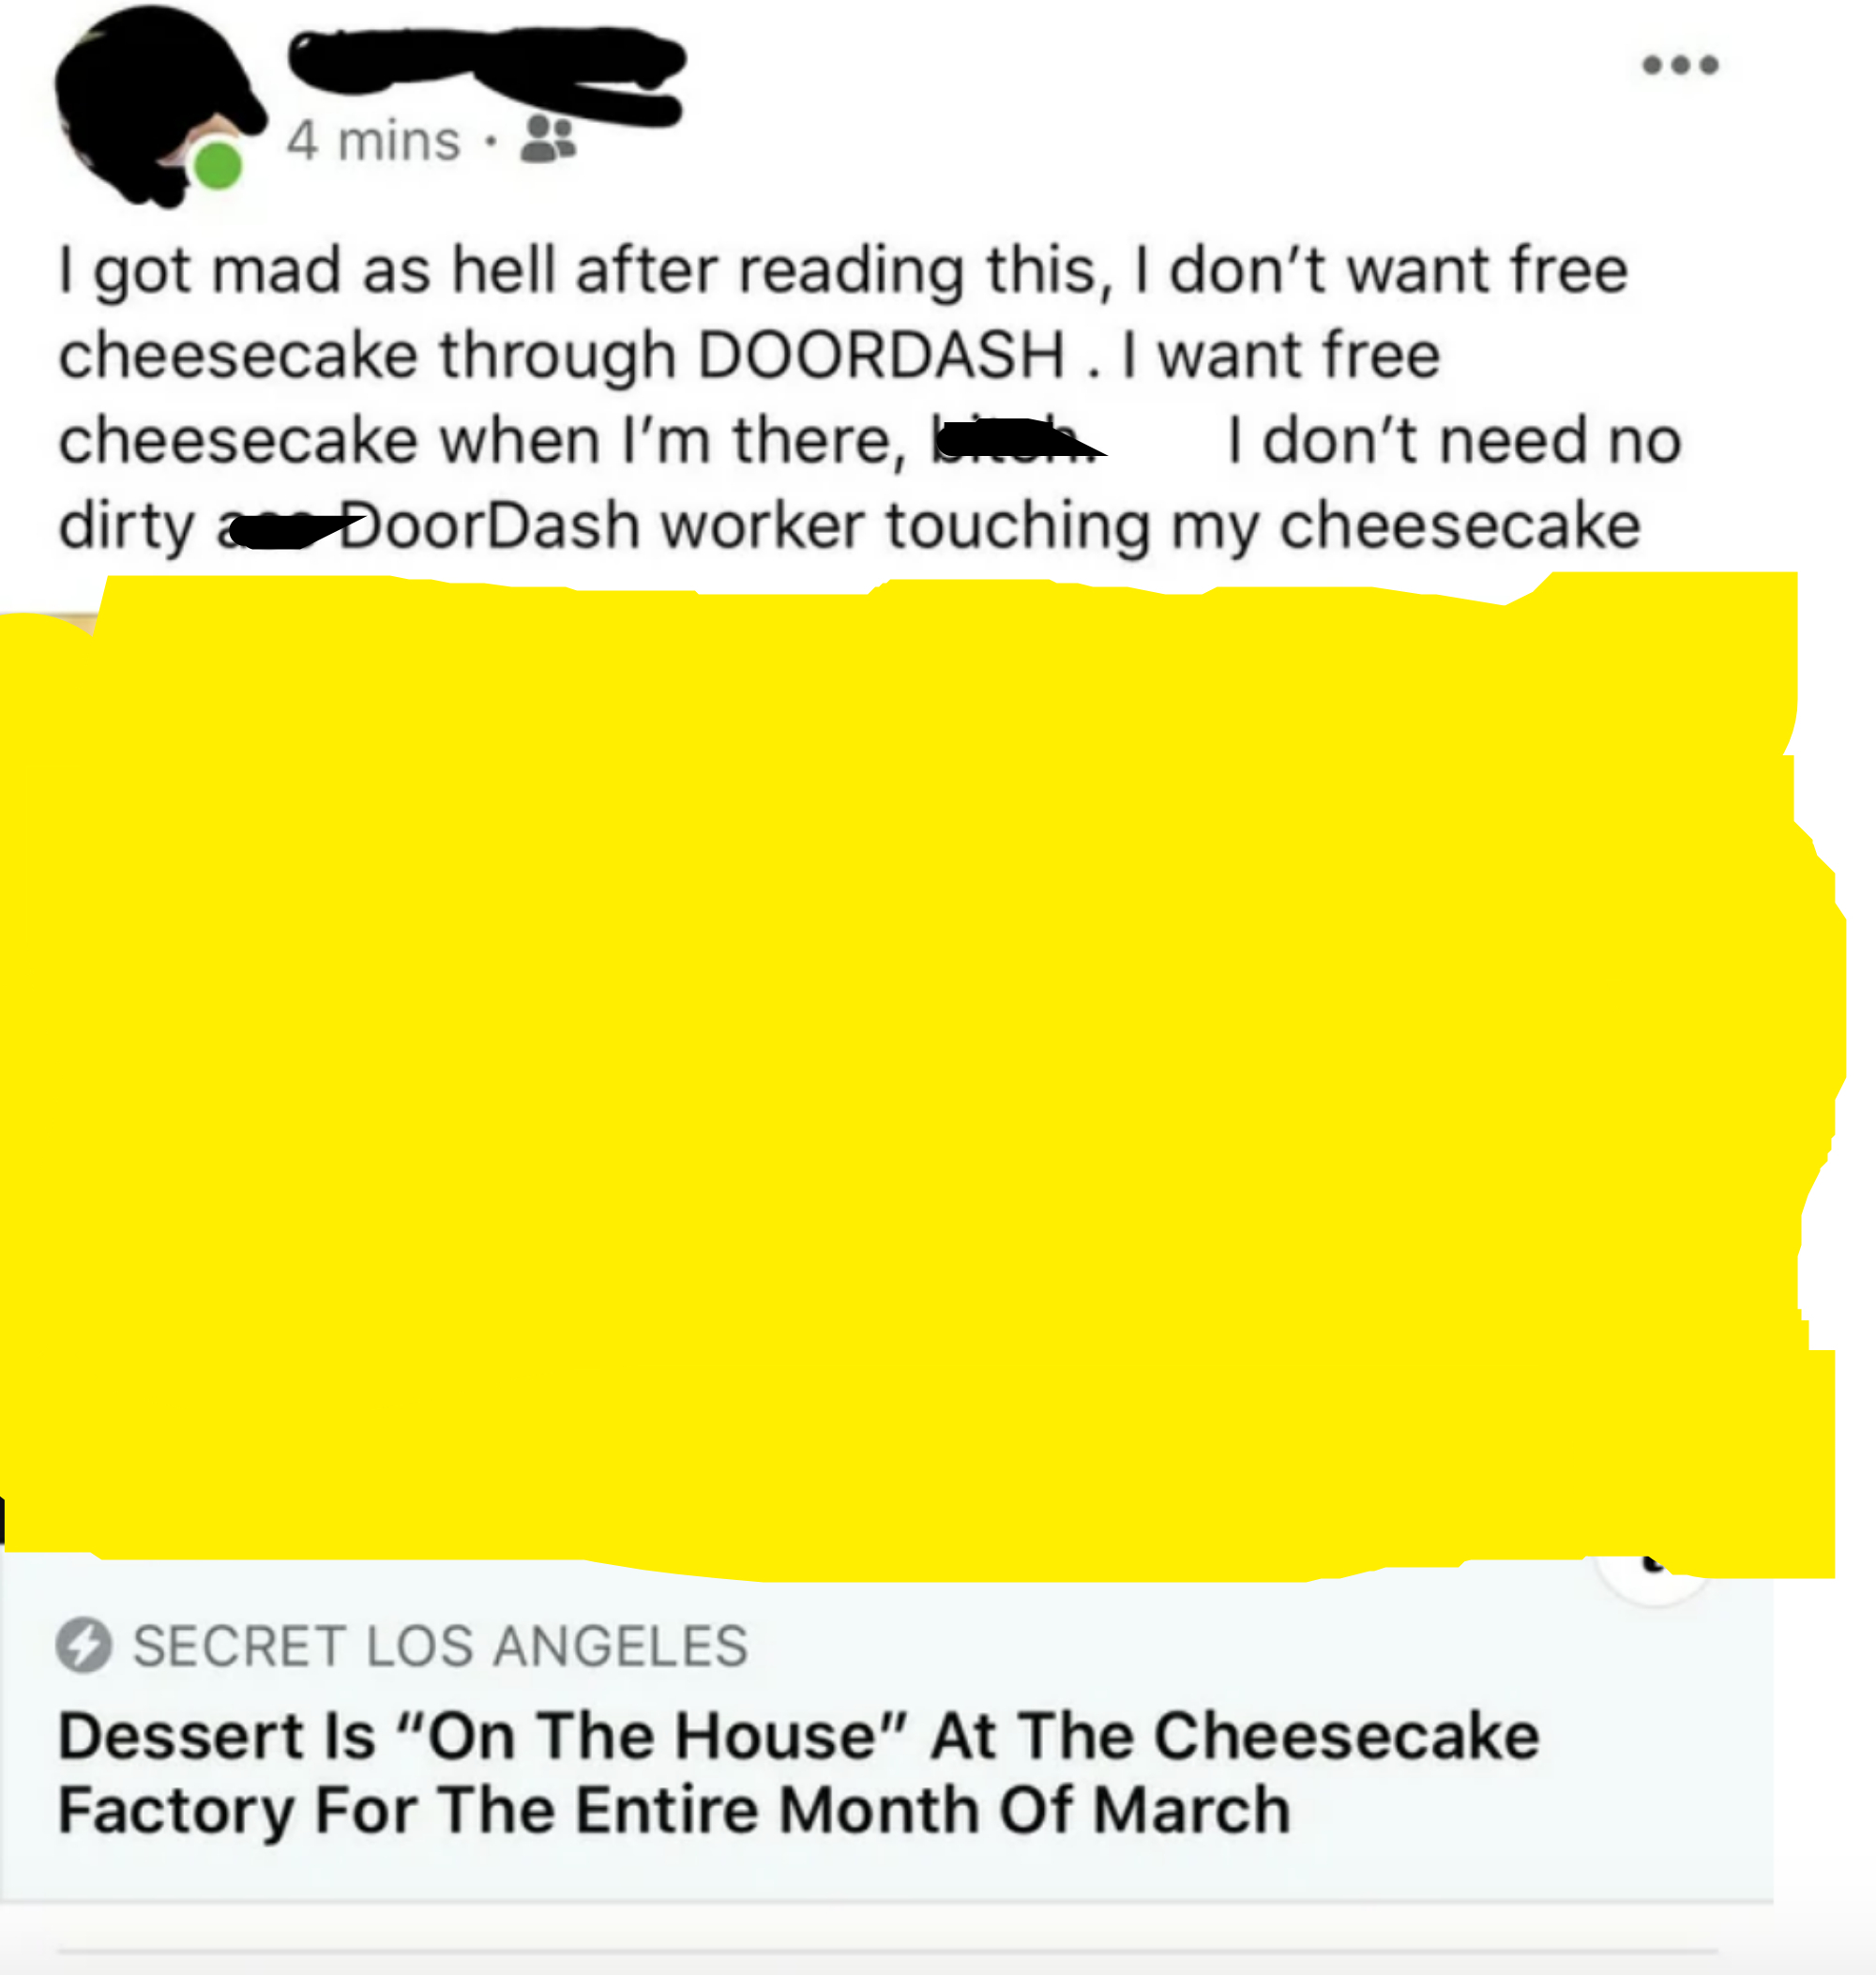 A person saying they want to just get free cheesecake, not be forced to use DoorDash to get it